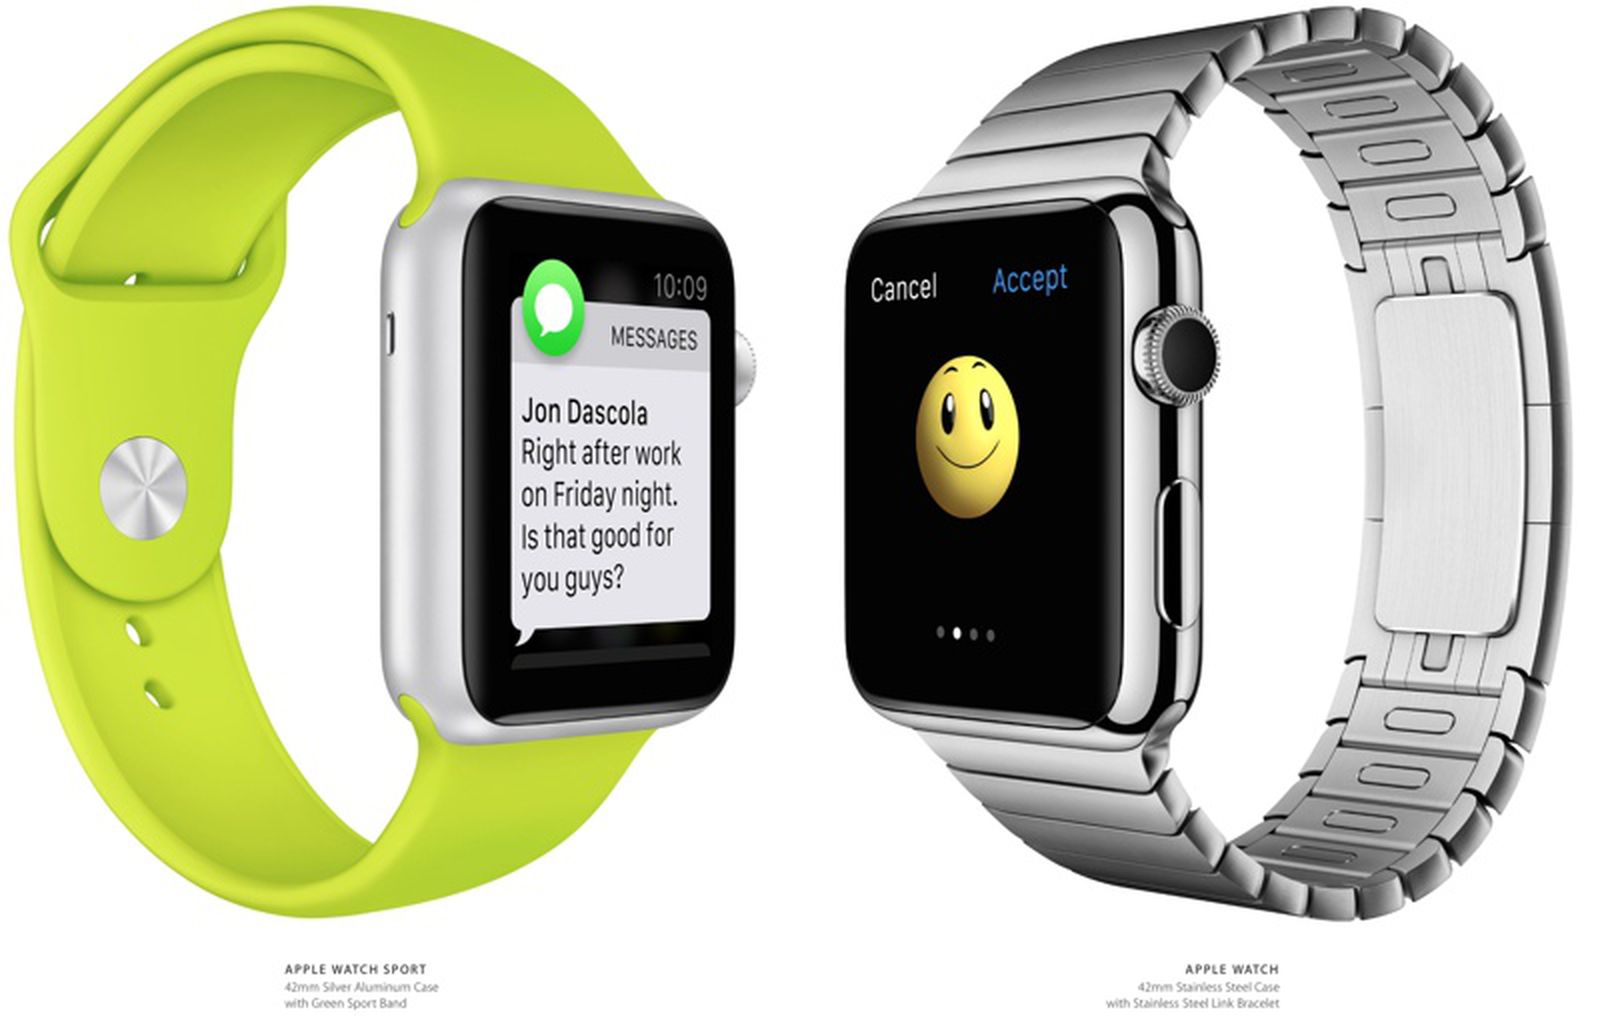 Apple Watch Battery Life Currently 'About a Day', but May ...